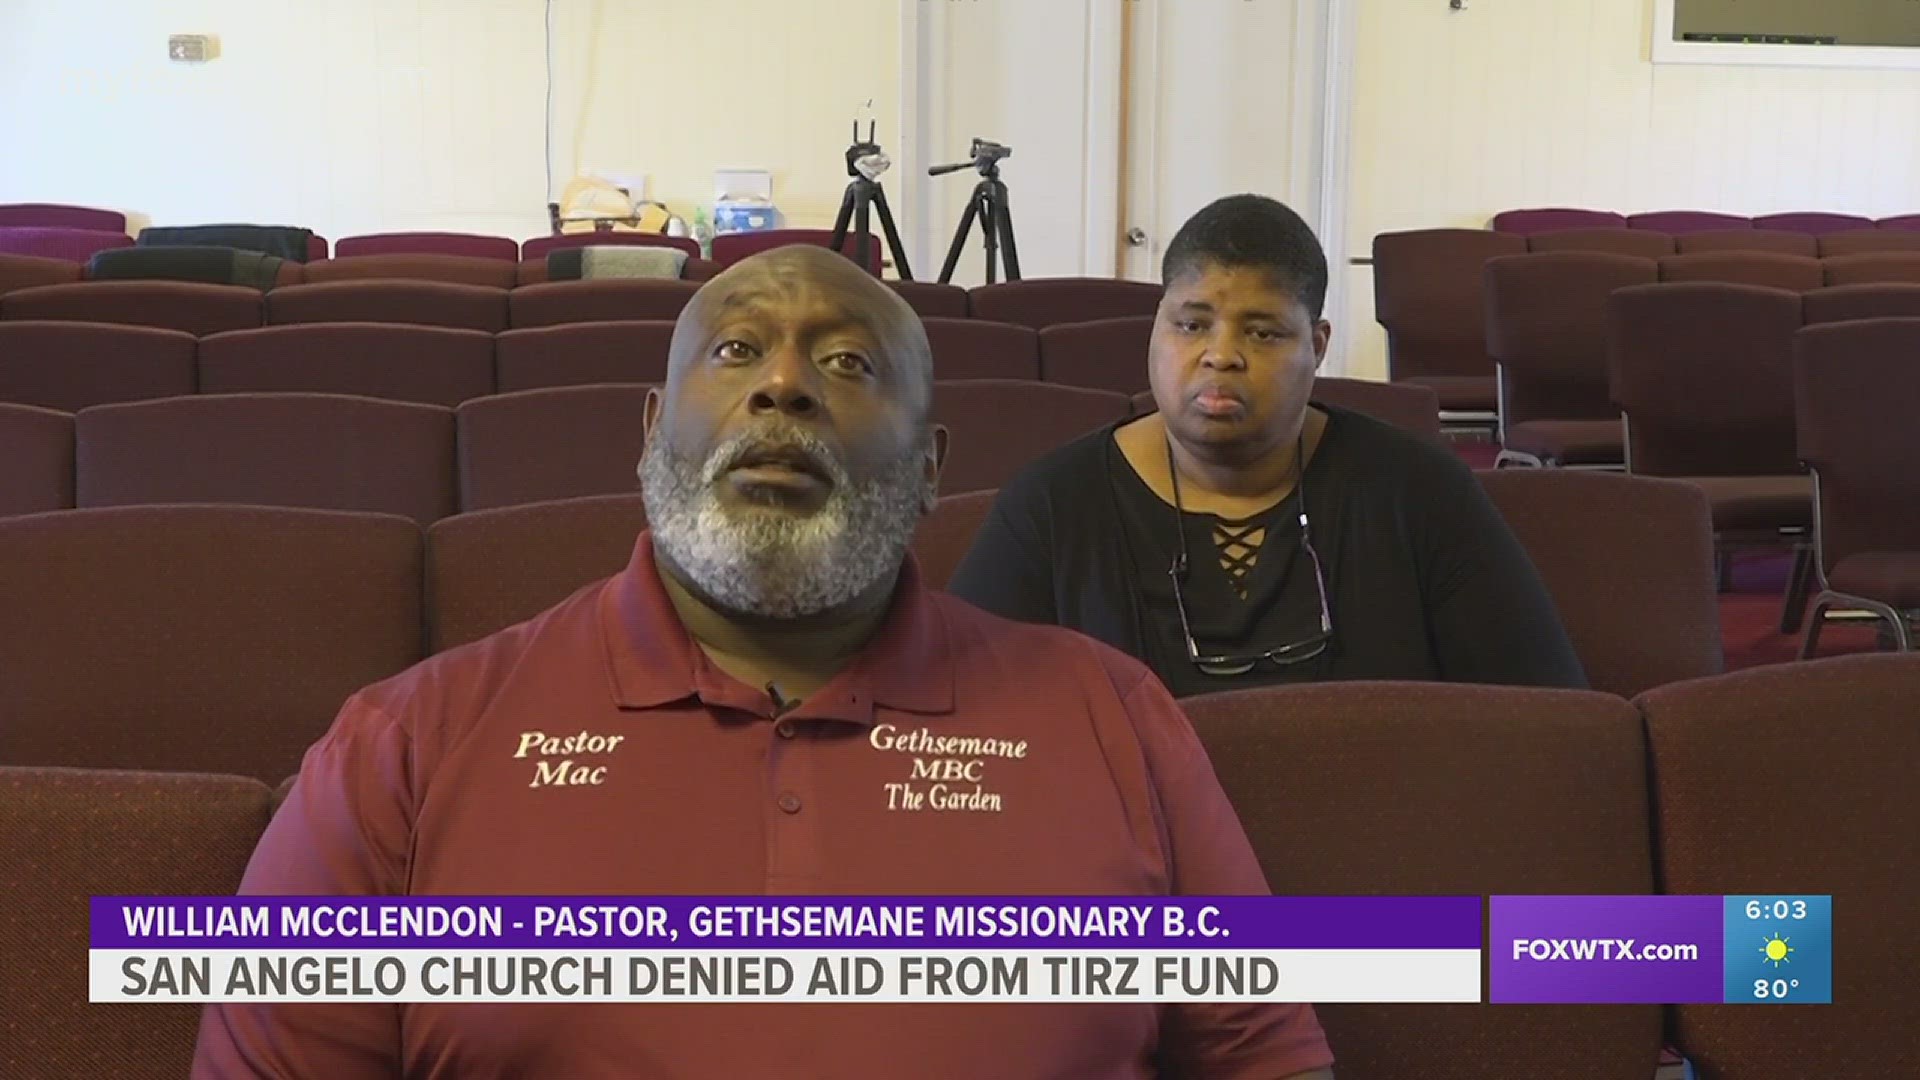 San Angelo non-profits were hit hard with the denial of TIRZ funds, as Gethsemane Missionary Baptist needs your help.